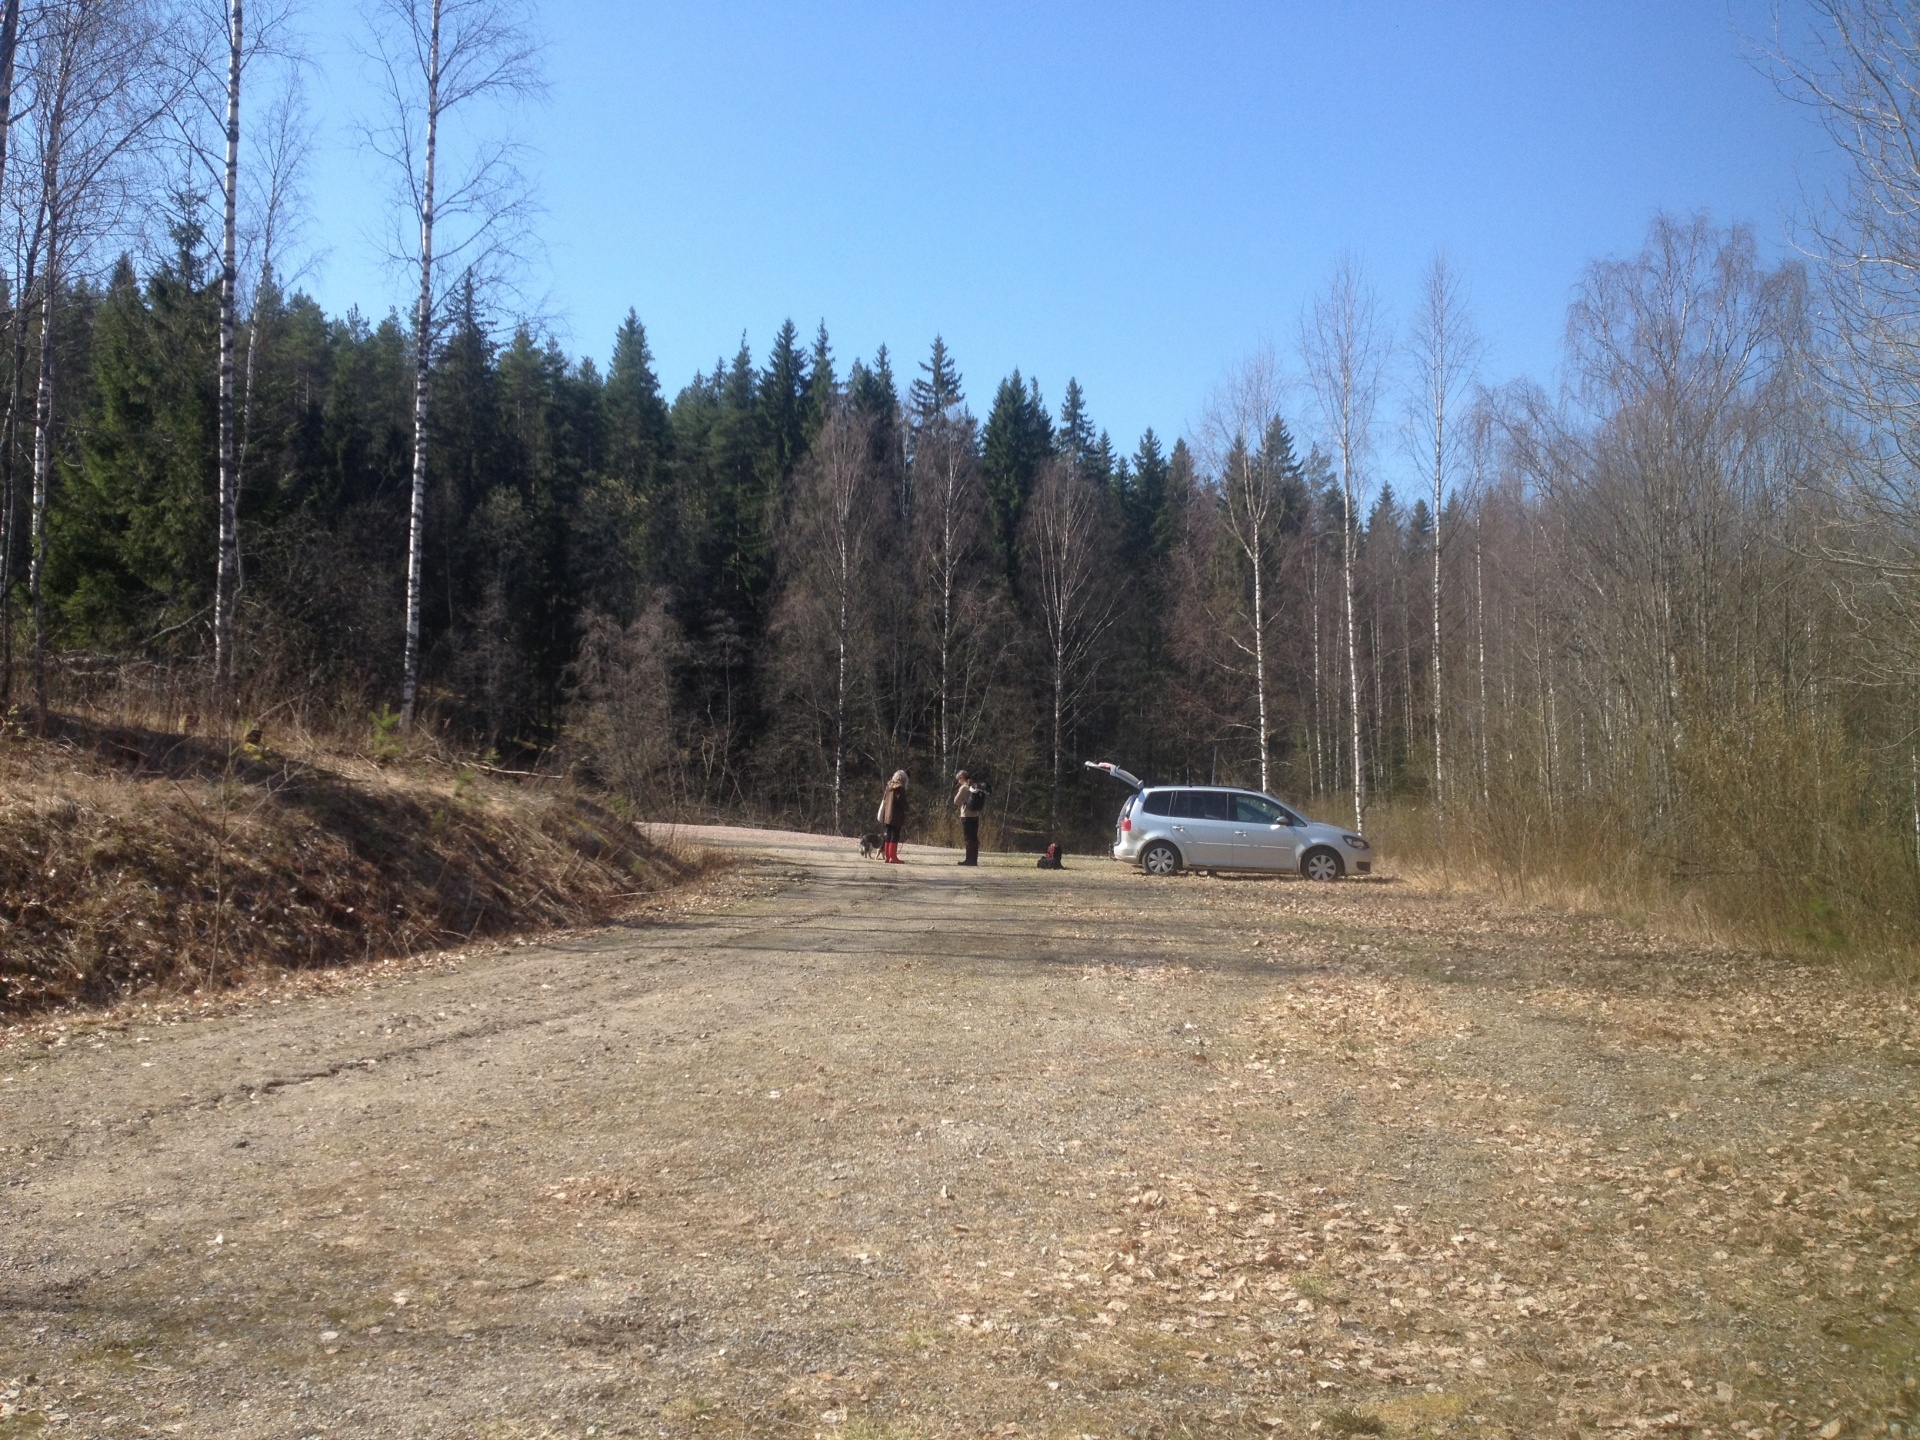 A parked car and hikers at the starting point of a hiking route in Mikkeli, Finland.